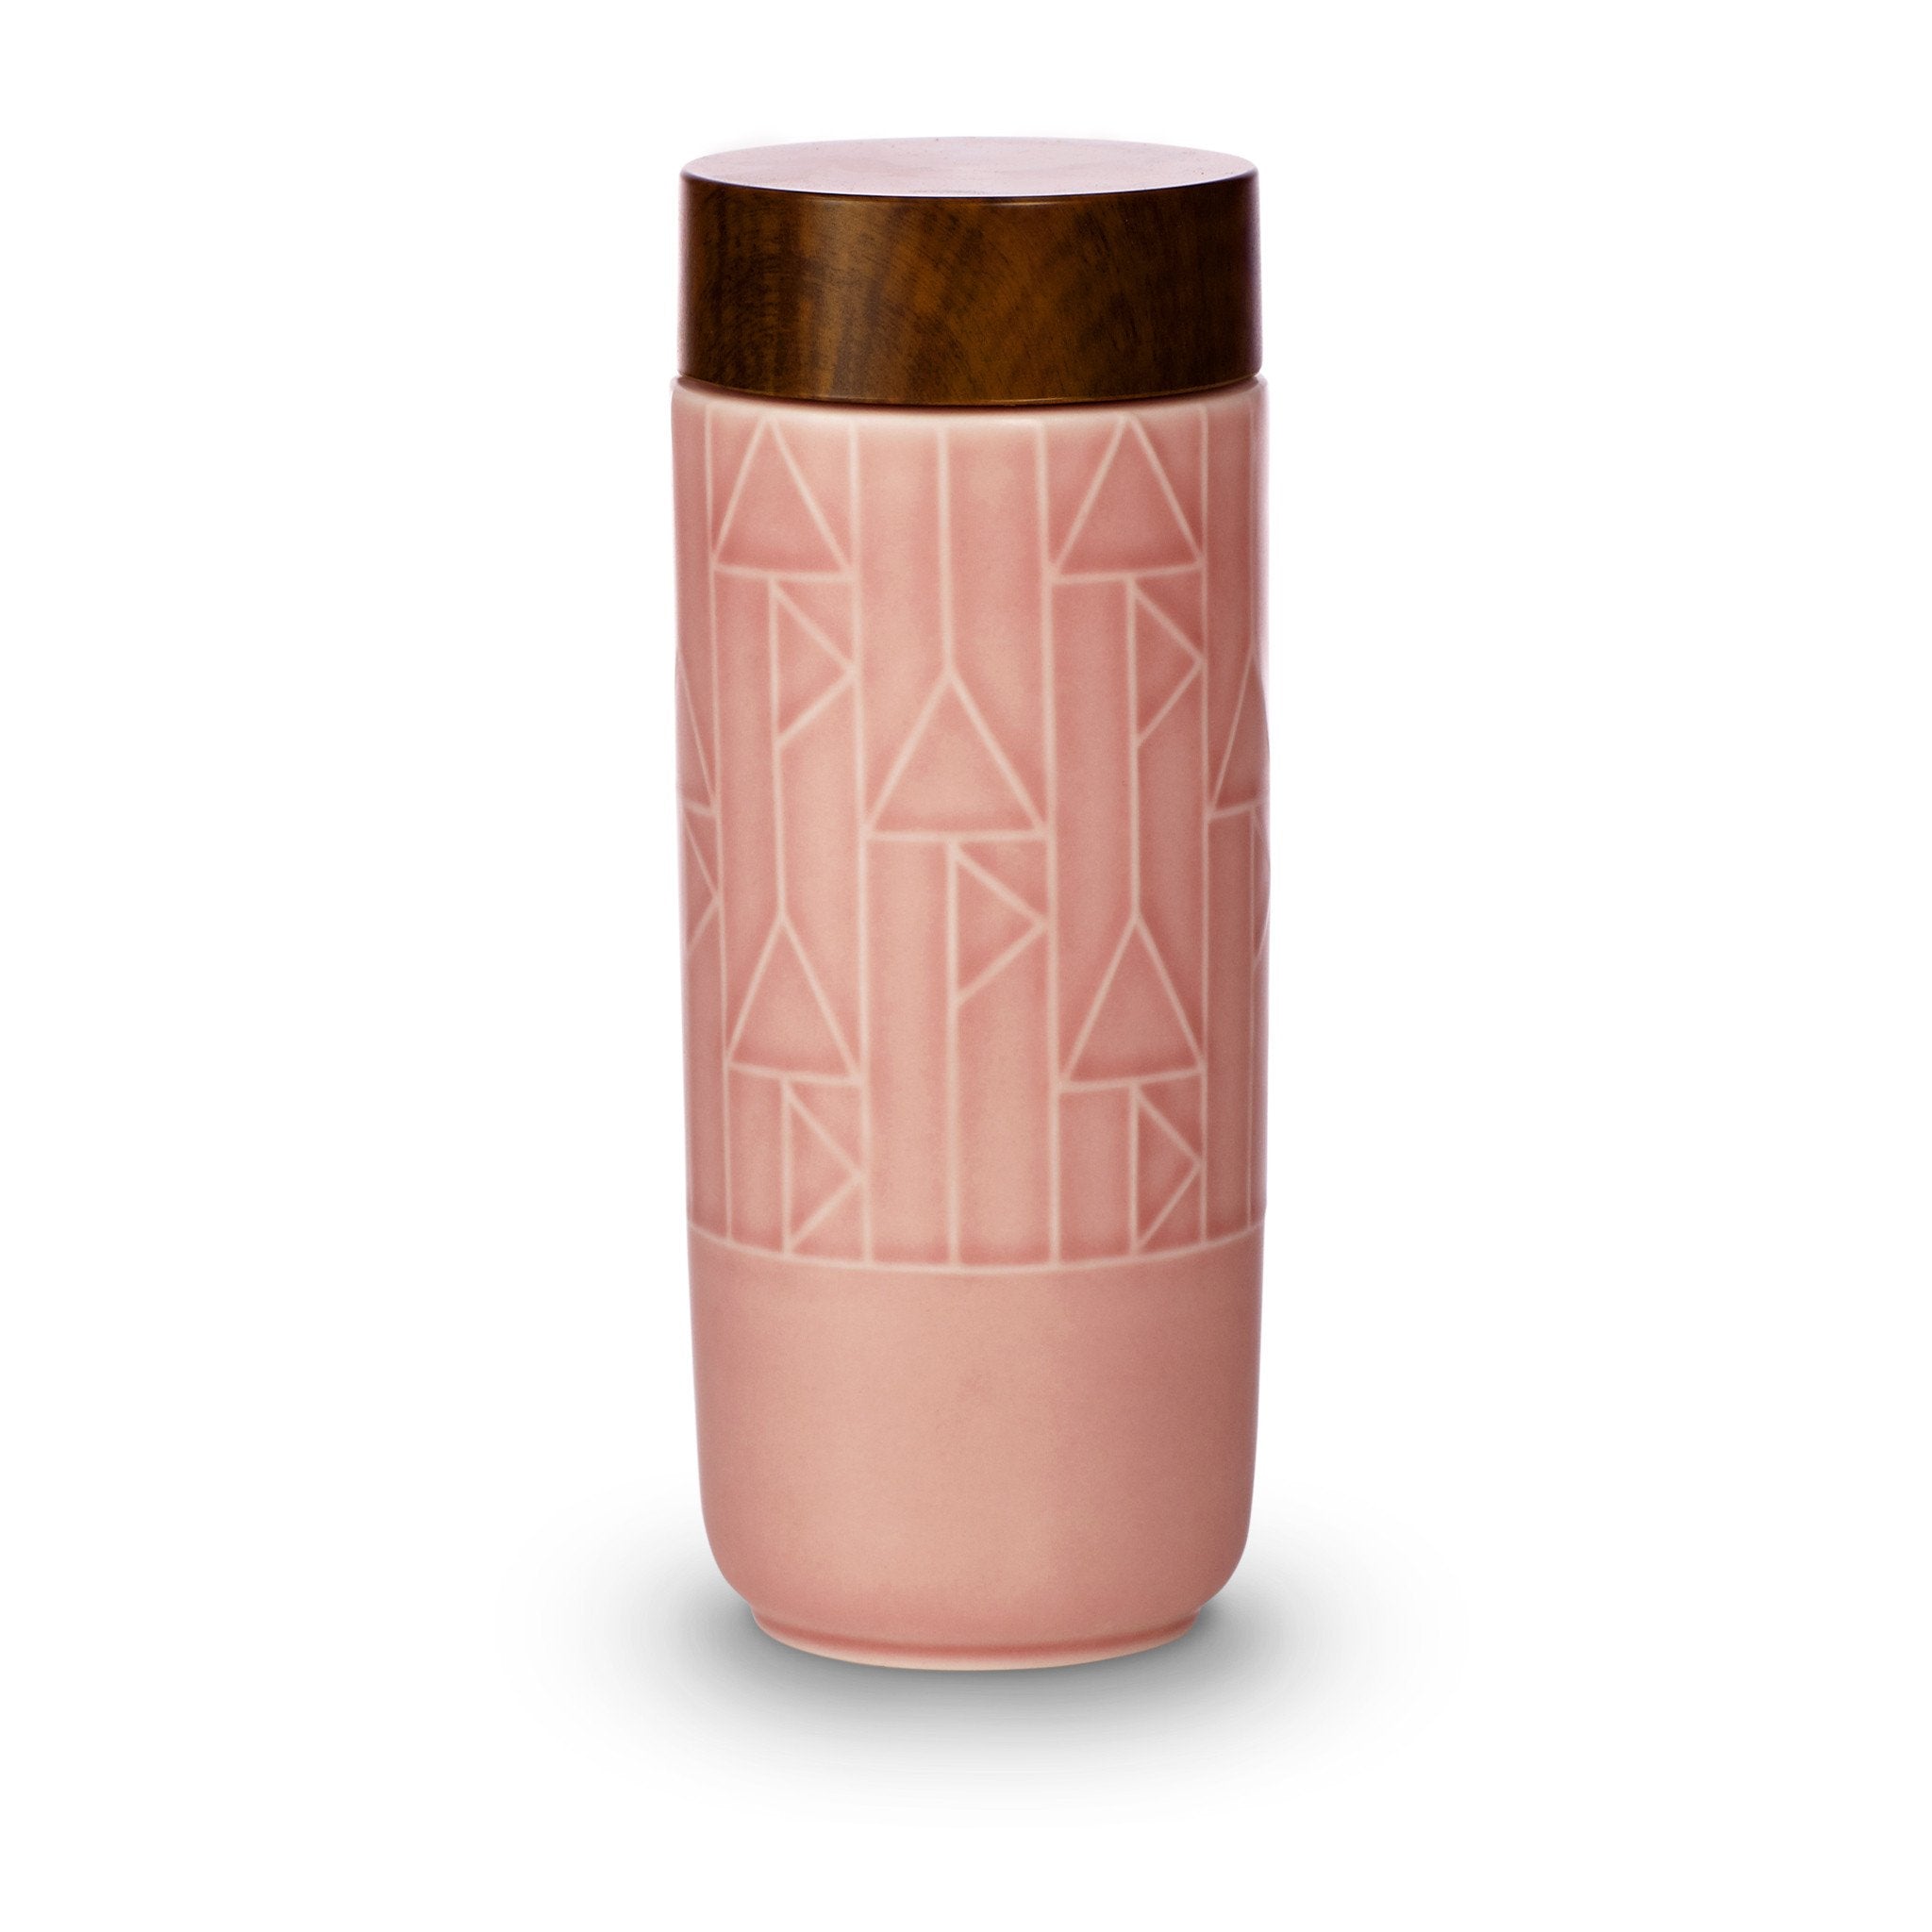 The Alchemical Signs Tumbler